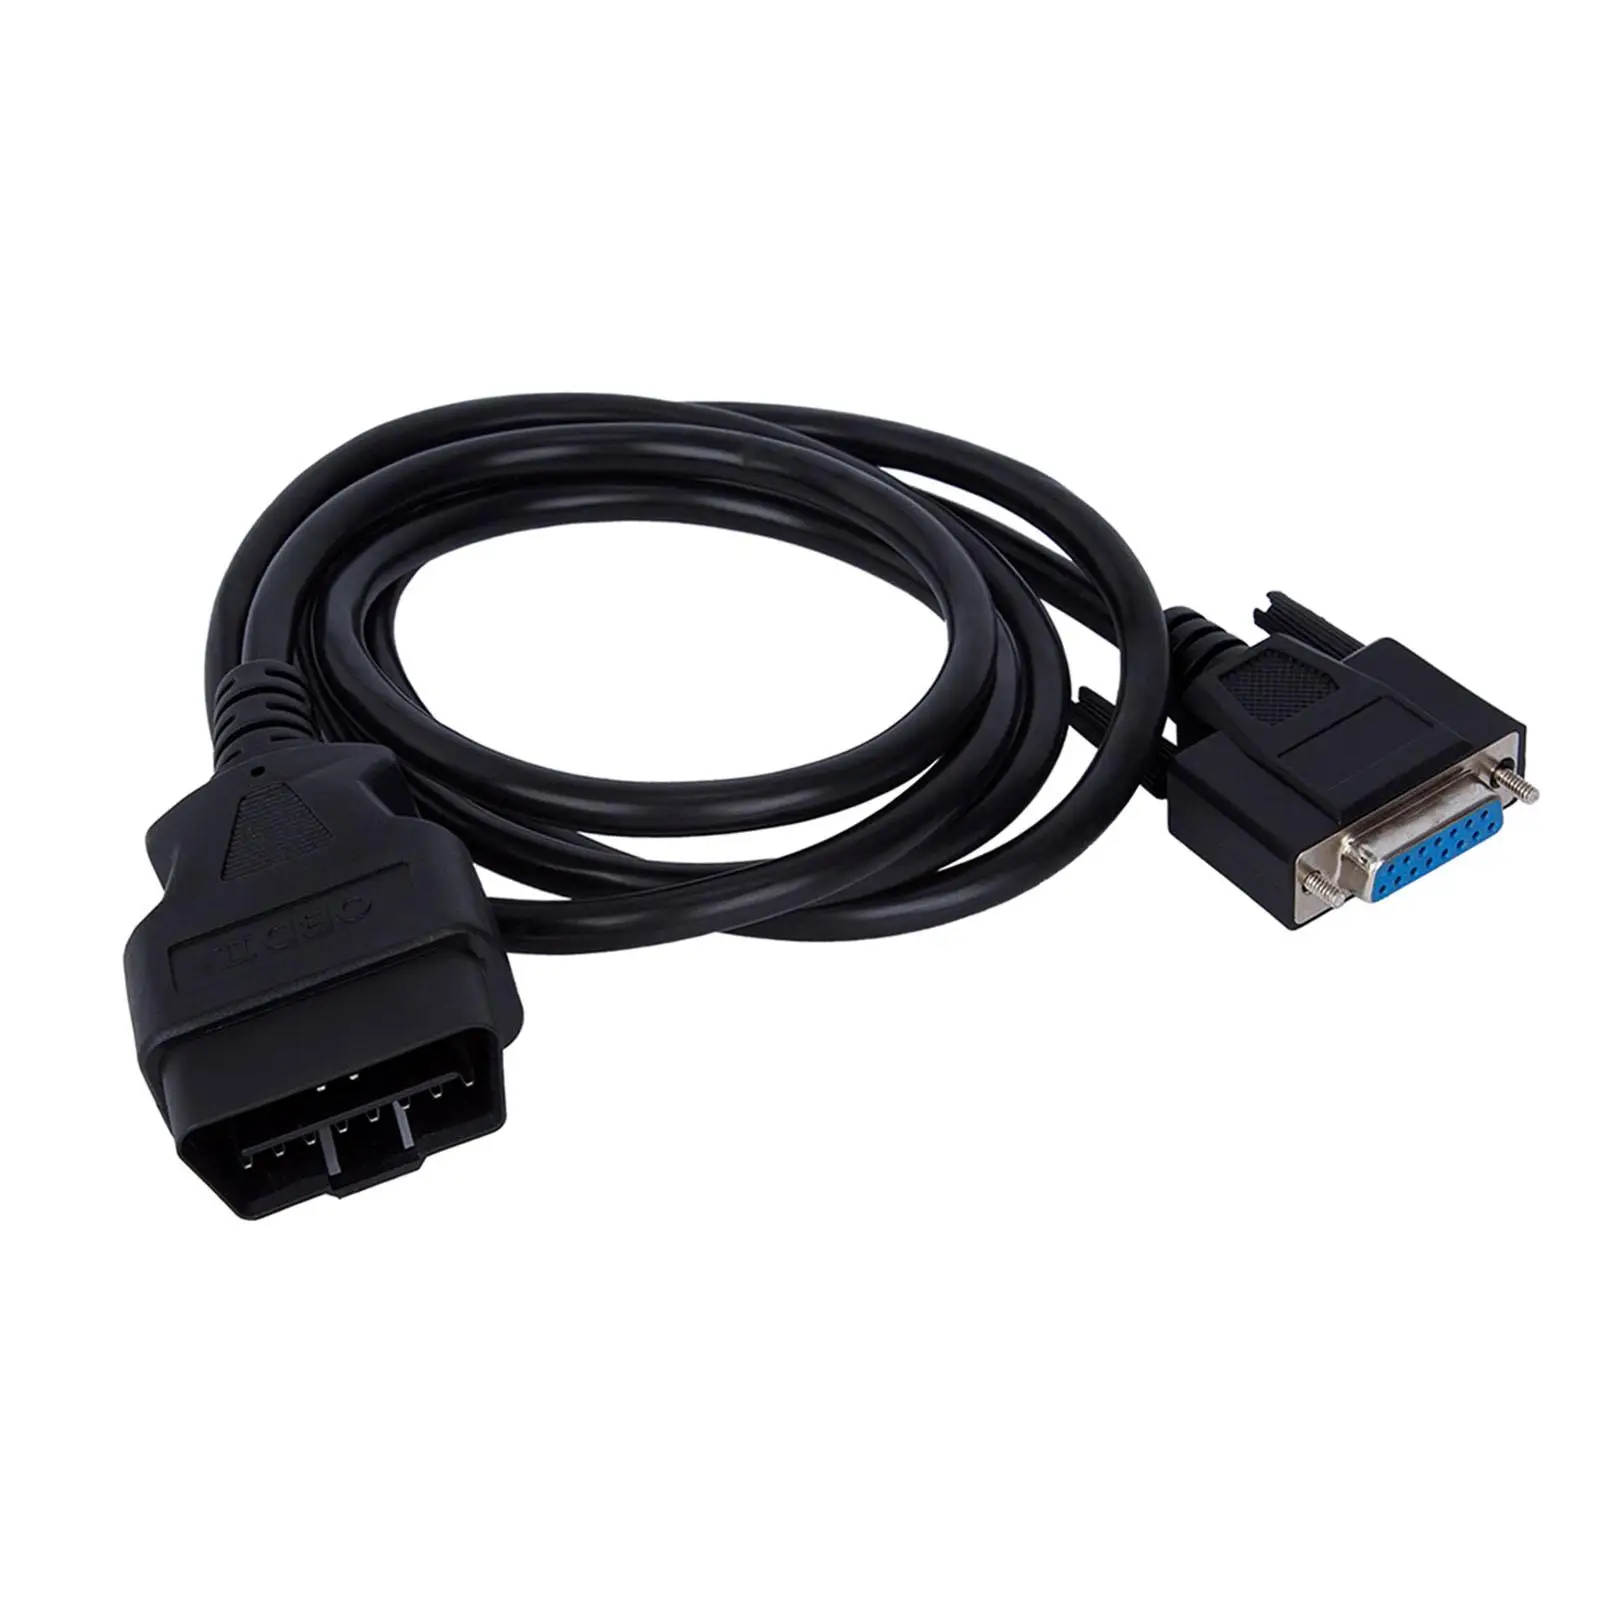 OBD II OBD2 16 Pin Male to Female Extension Cable, ,Male OBDII Cable Adapter Cable